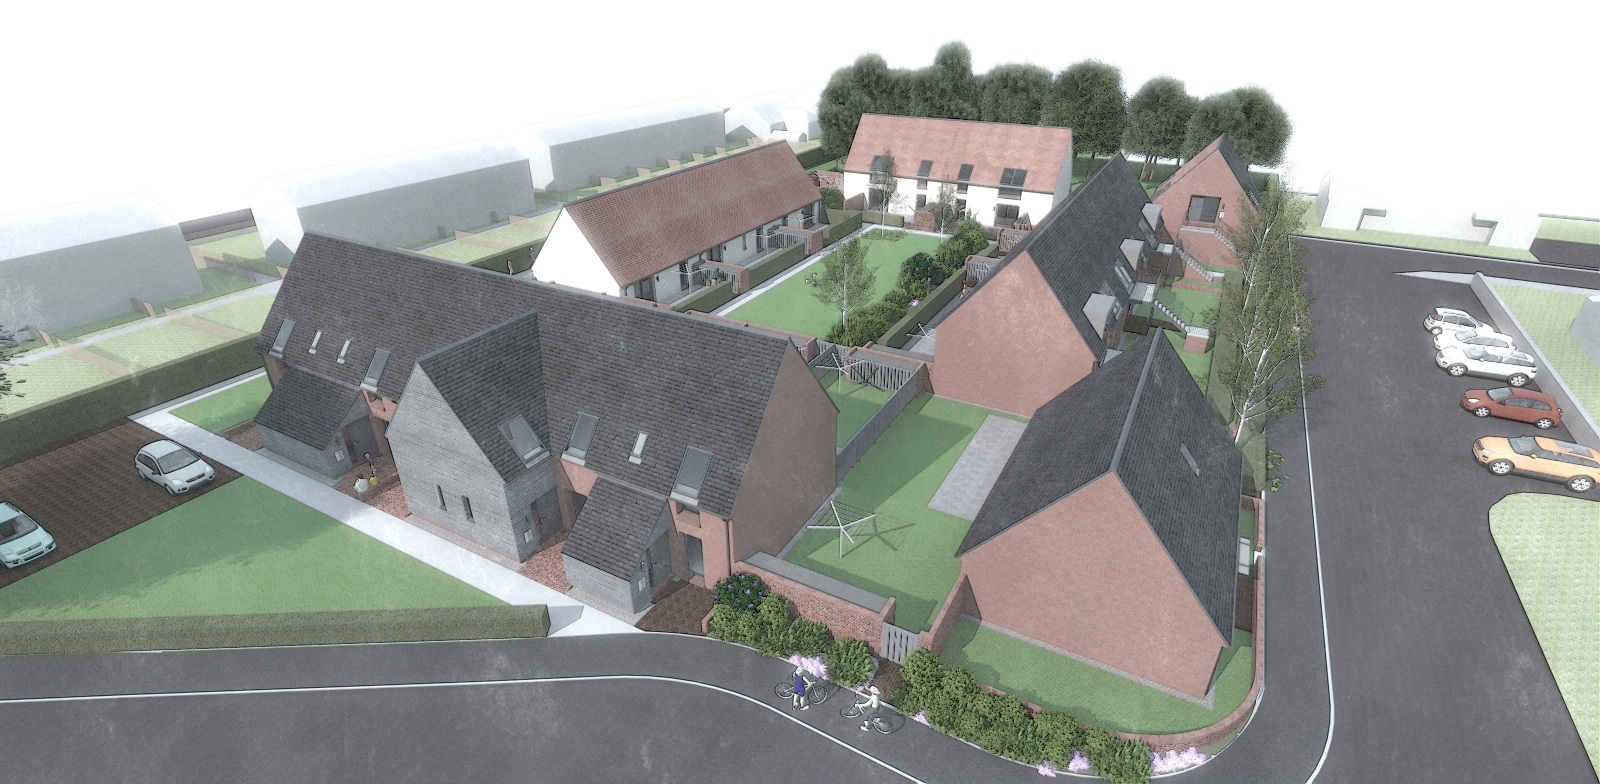 New council homes planned for Edzell